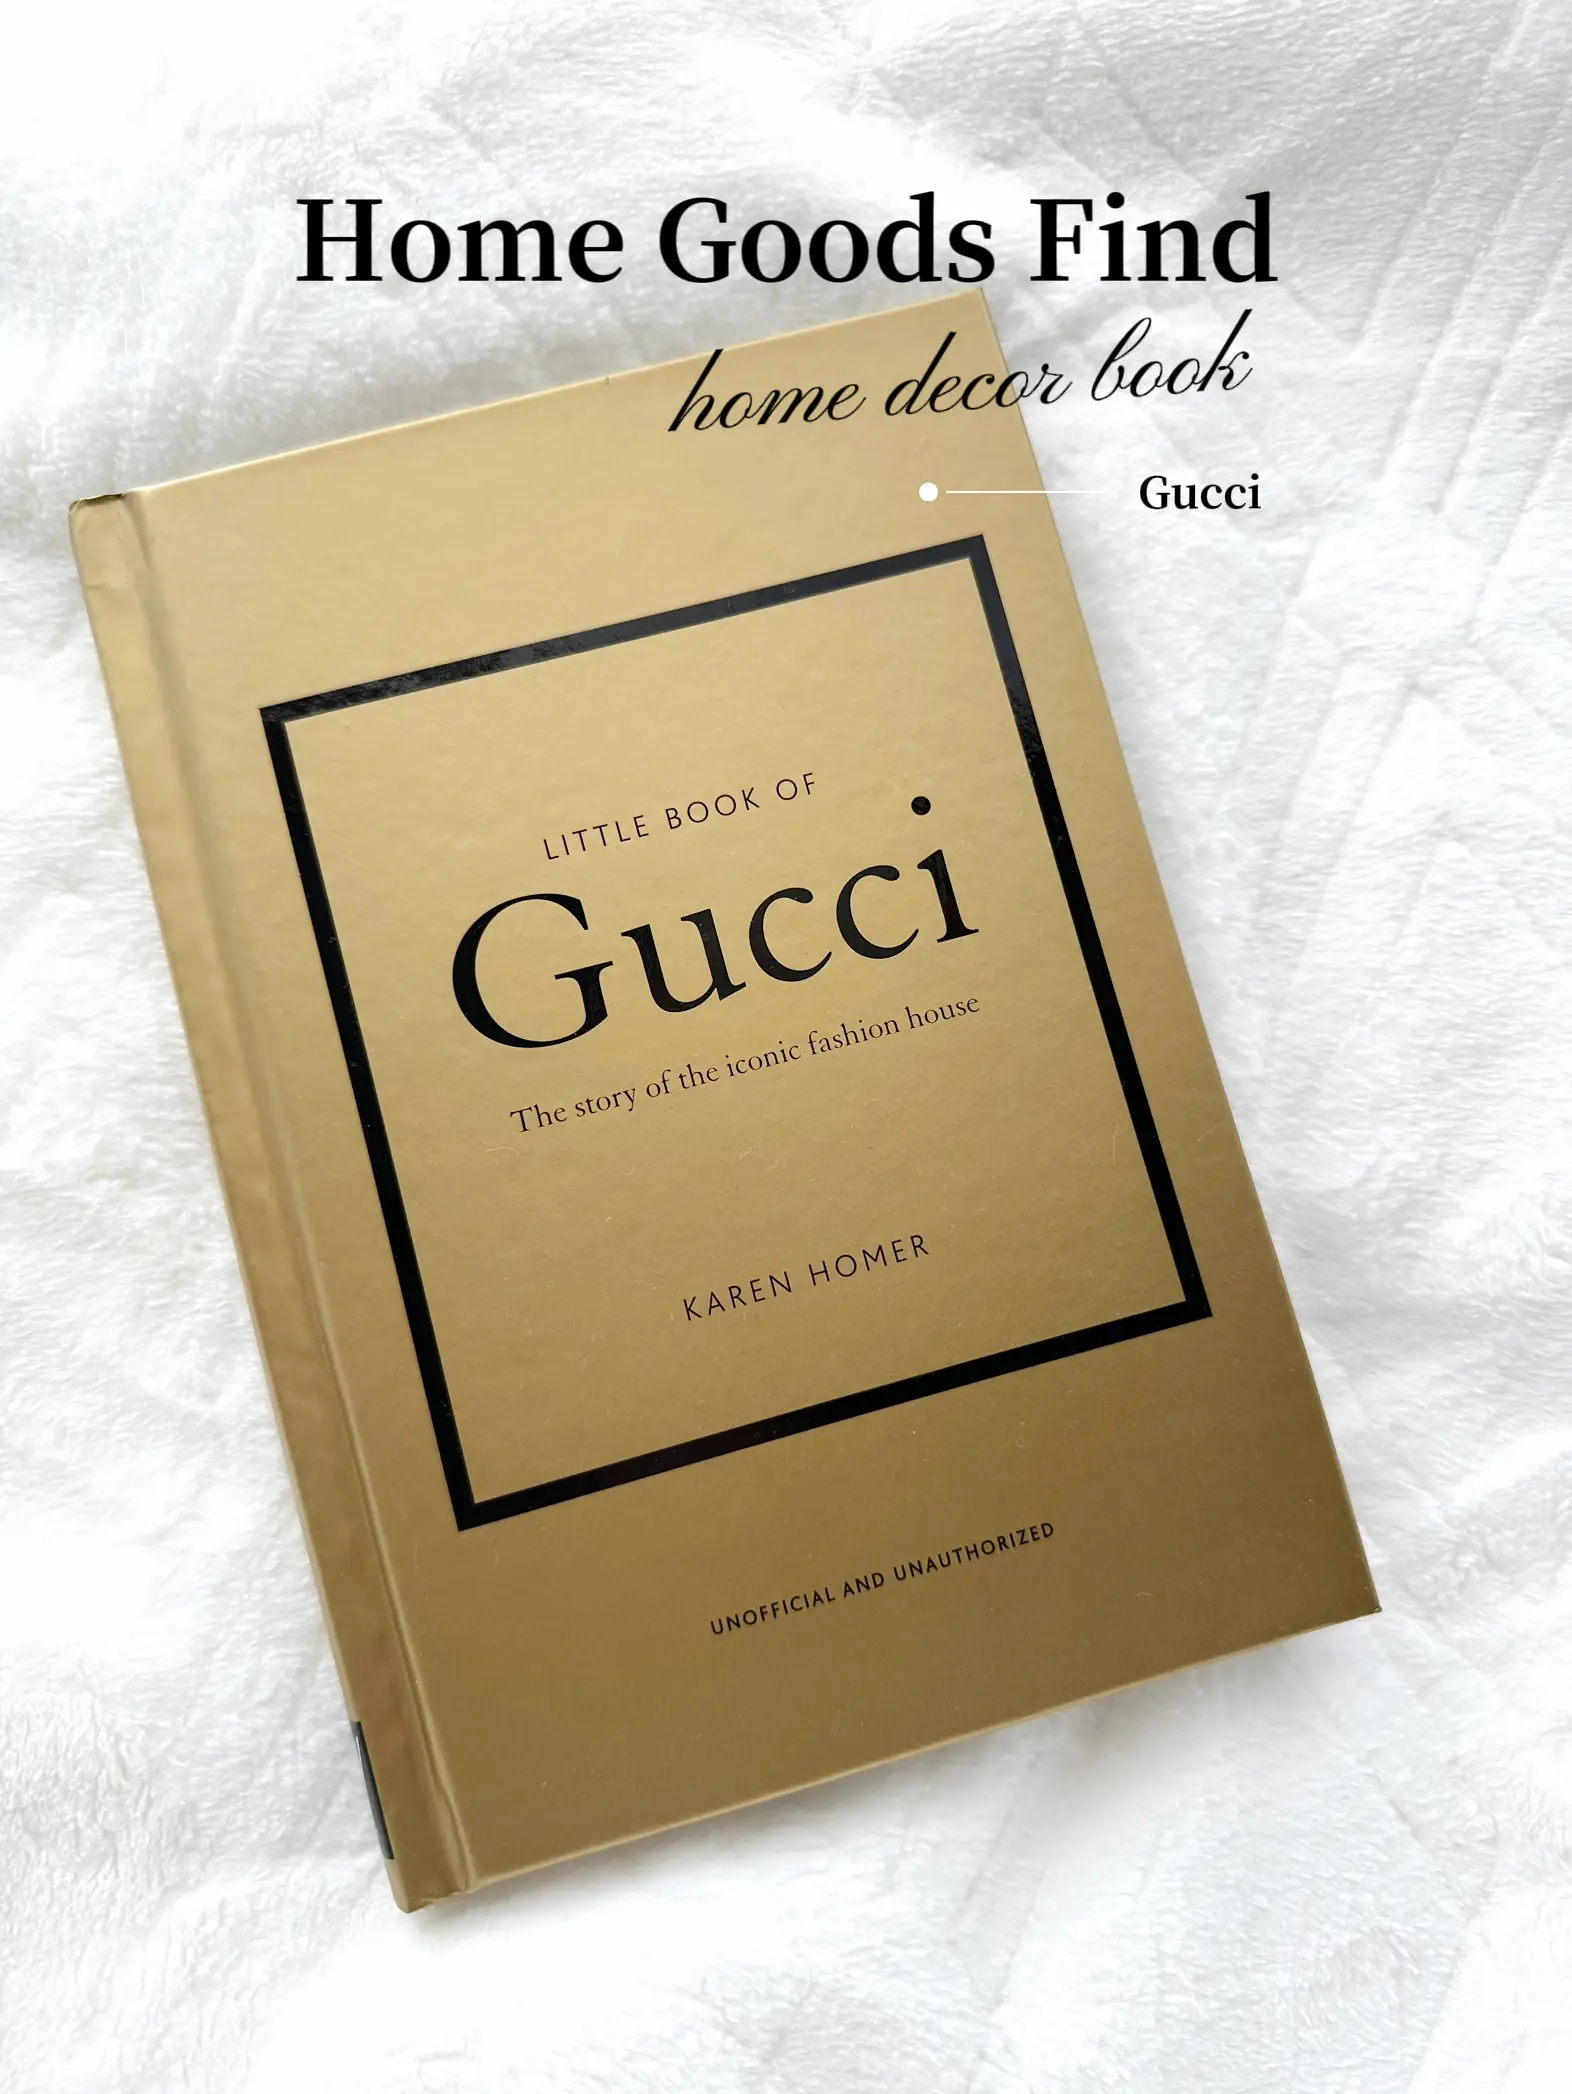 Little Book of Gucci: The Story of the Iconic Fashion House [Book]